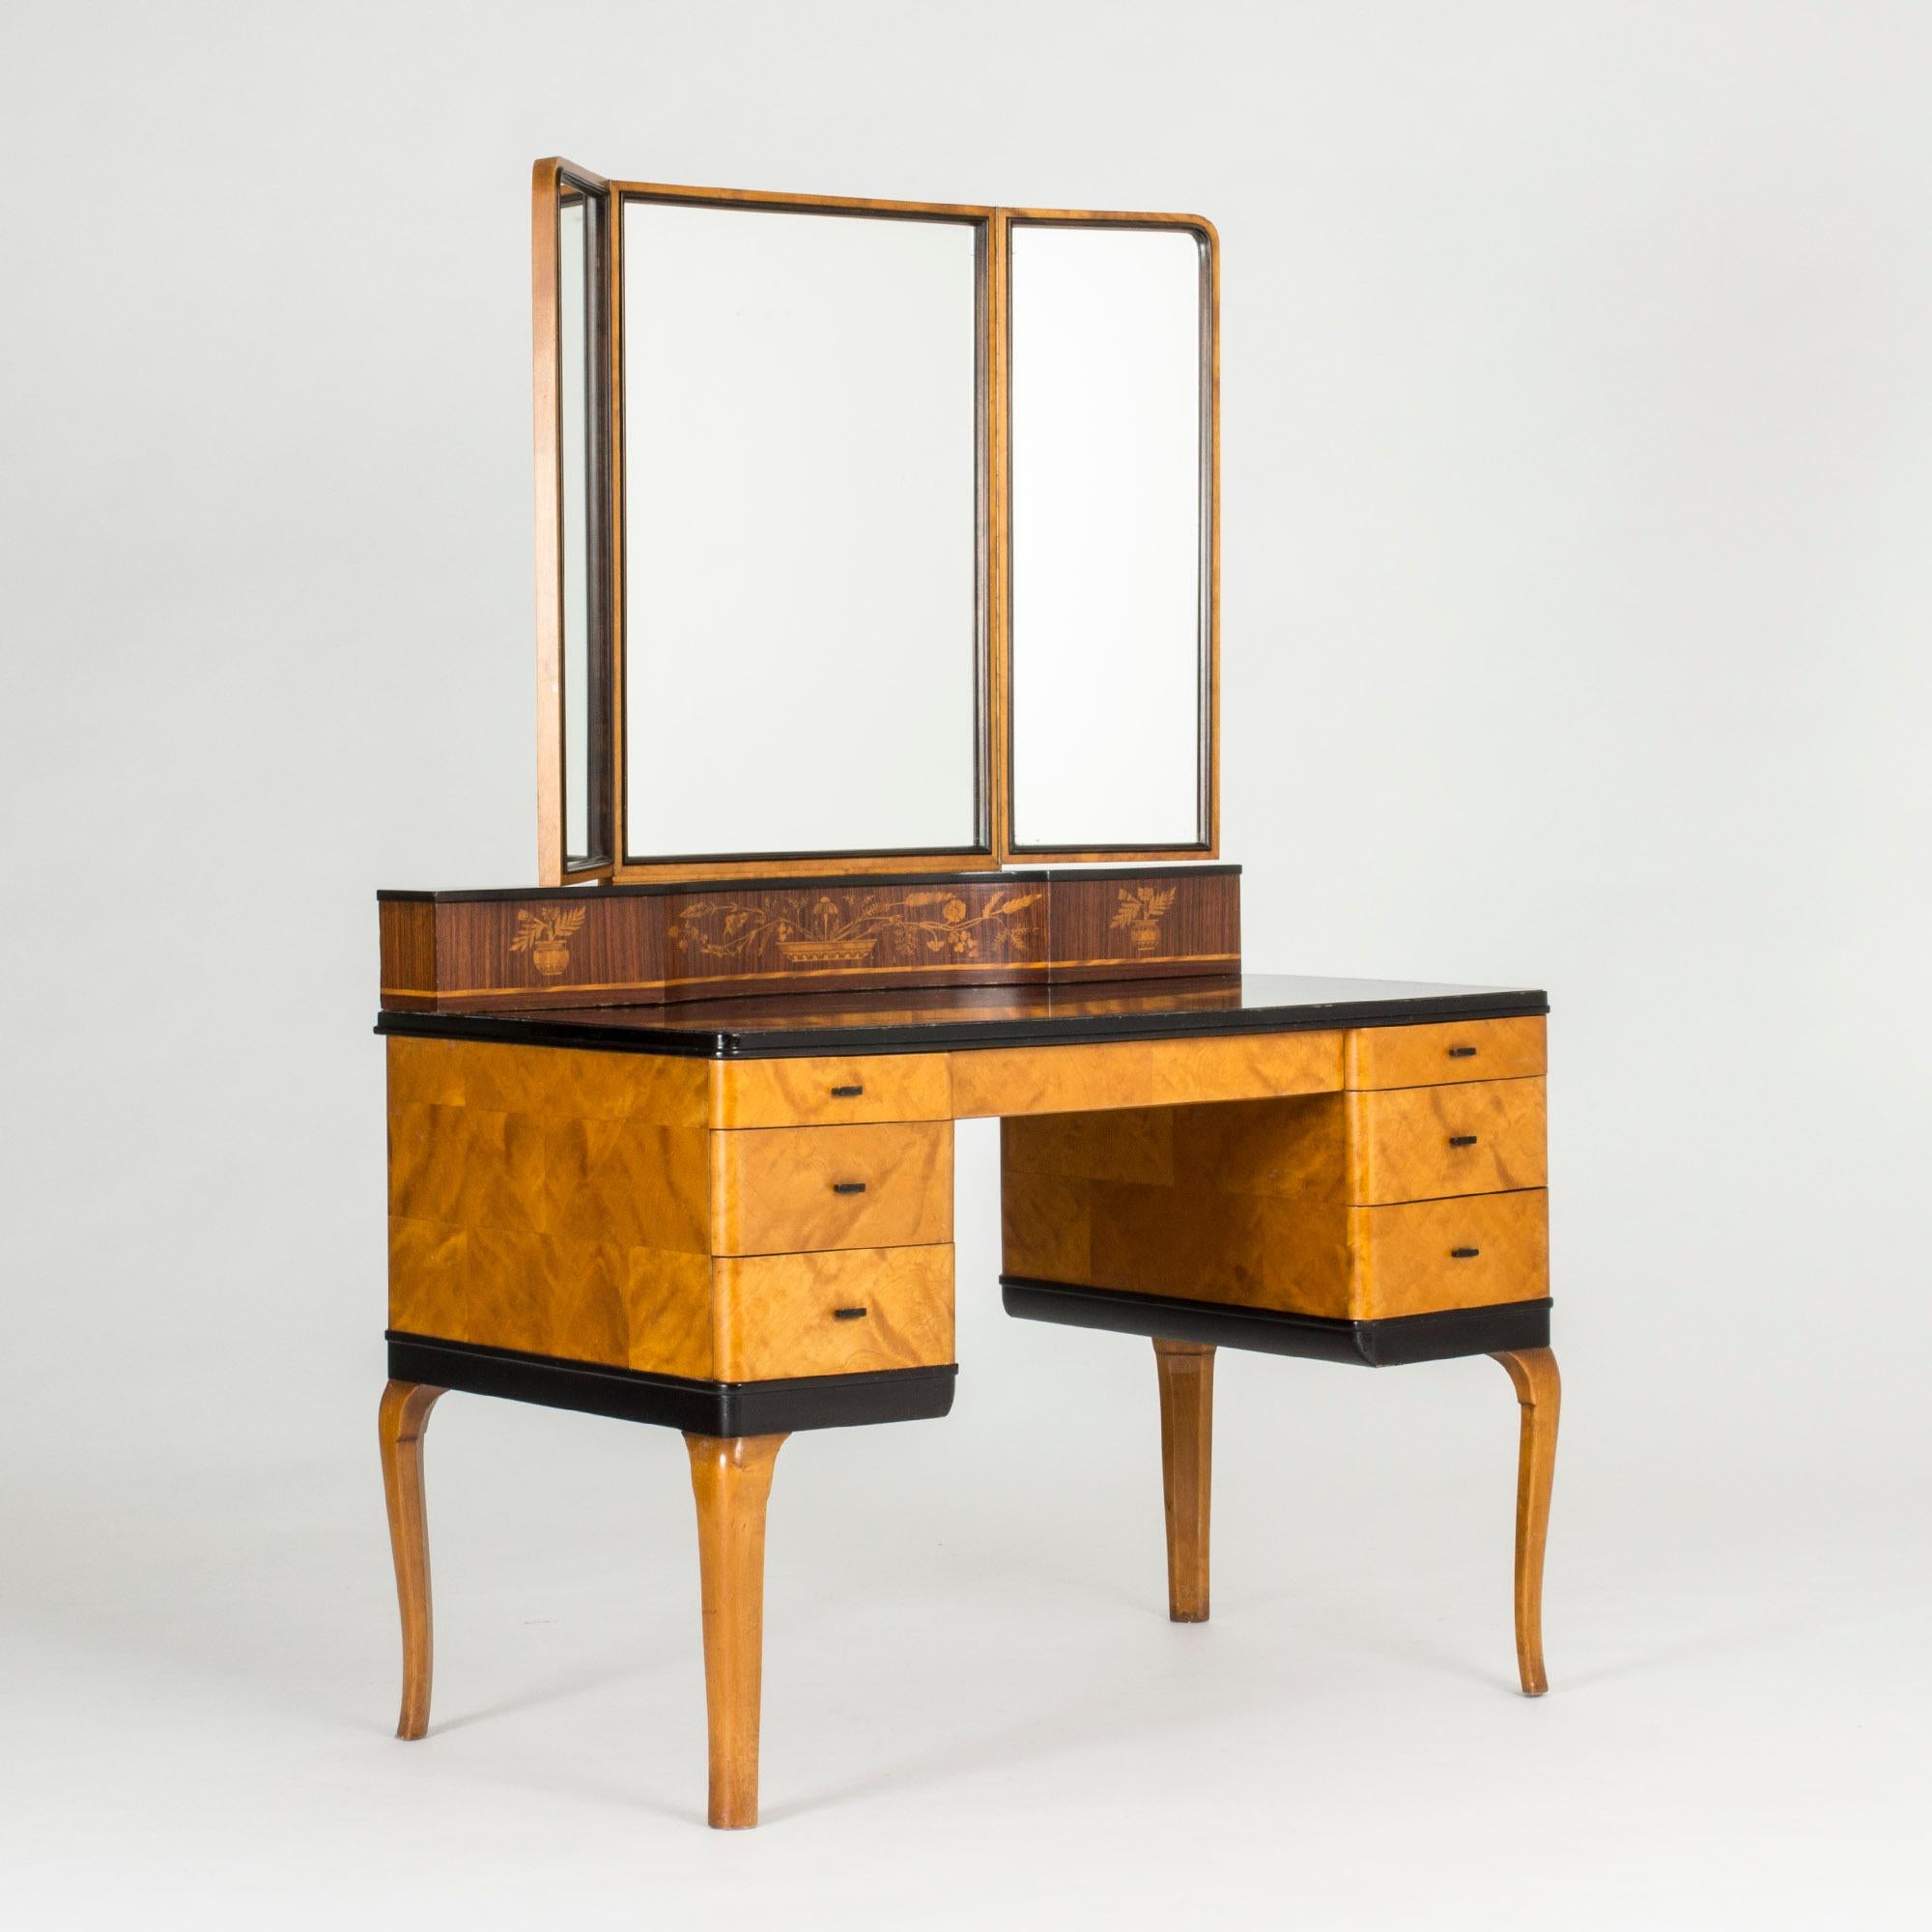 Beautiful “Haga” dressing table by Carl Malmsten. Birch veneer contrasts with the black lacquered table top and the decorative darker wood with inlays under the mirrors. Functionalism with an elegant touch of rokoko.